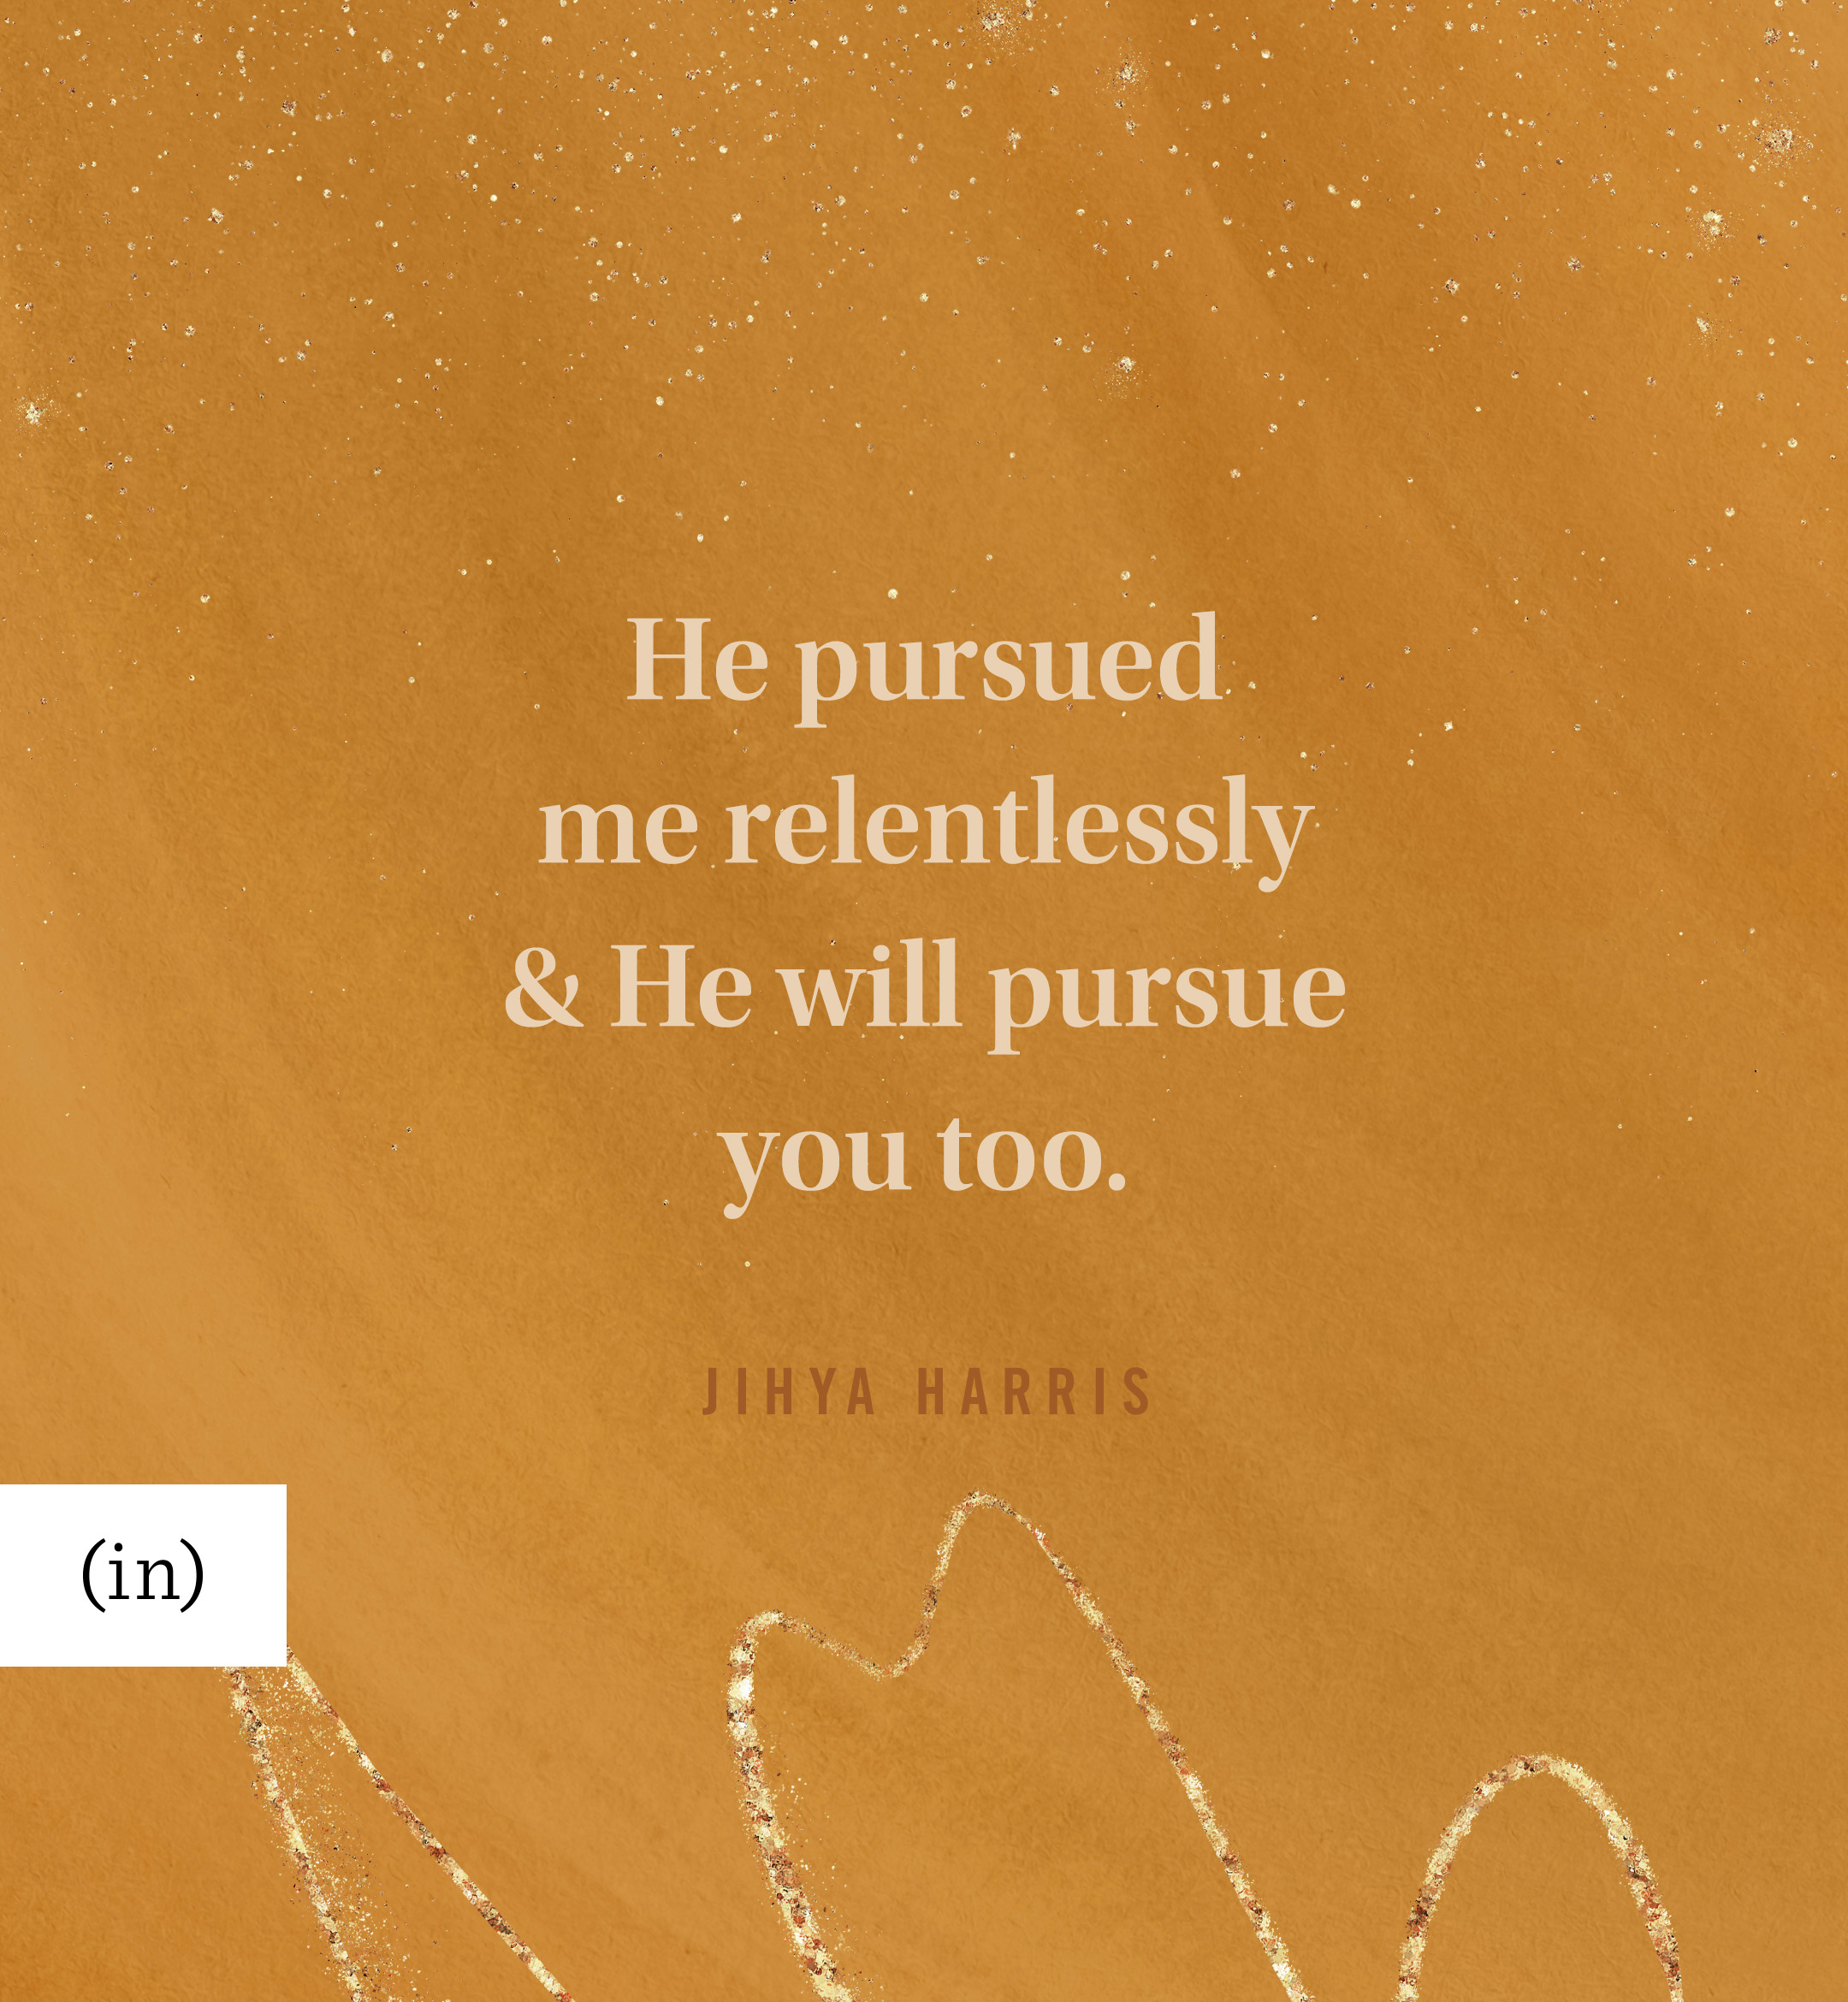 He pursued me relentlessly and He will pursue you too. -Jihya Harris